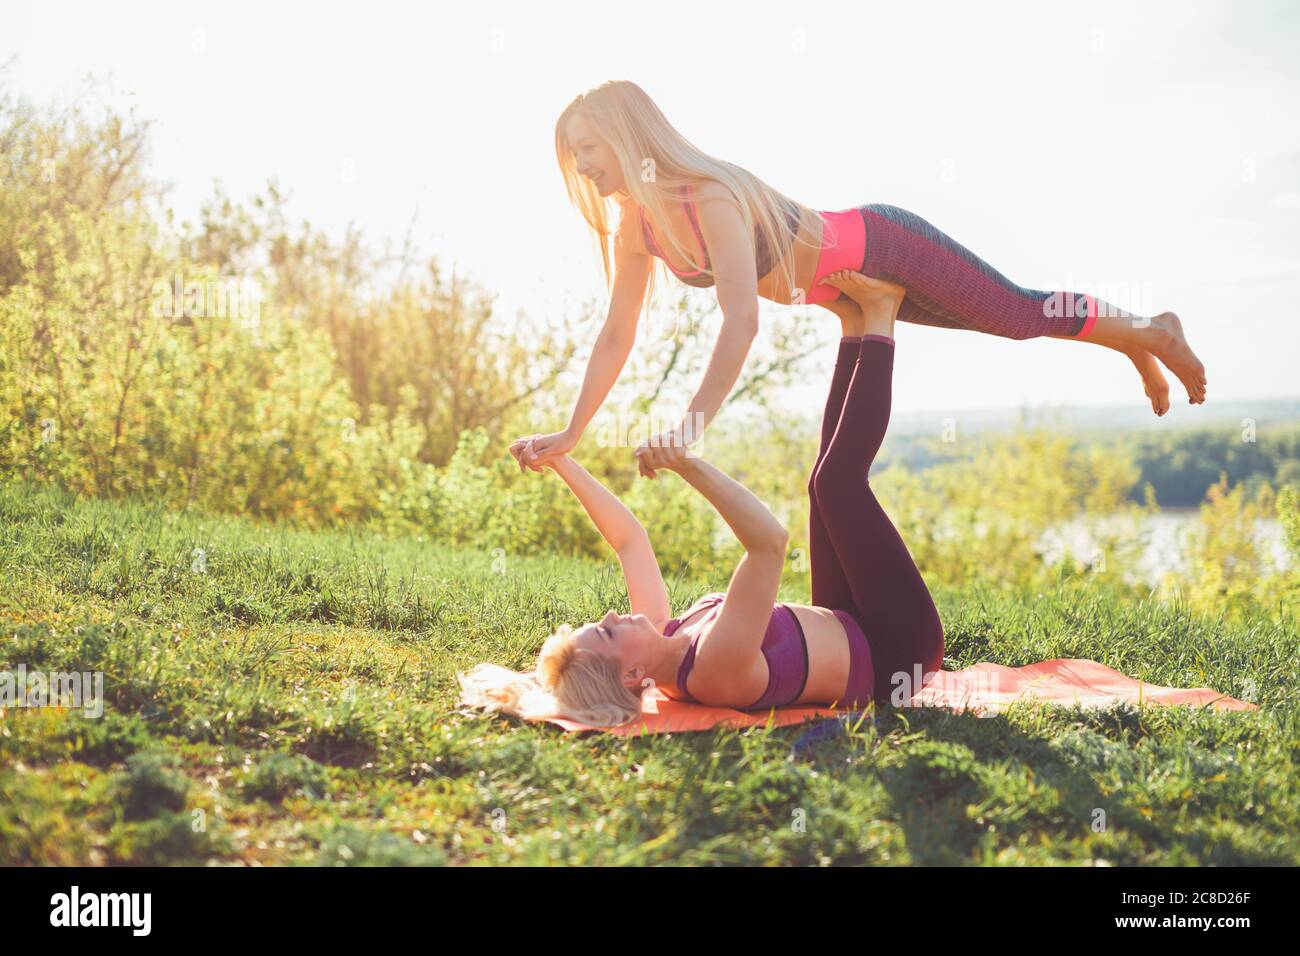 two women contorsionist practicing gymnastic yoga outdoor Stock Photo